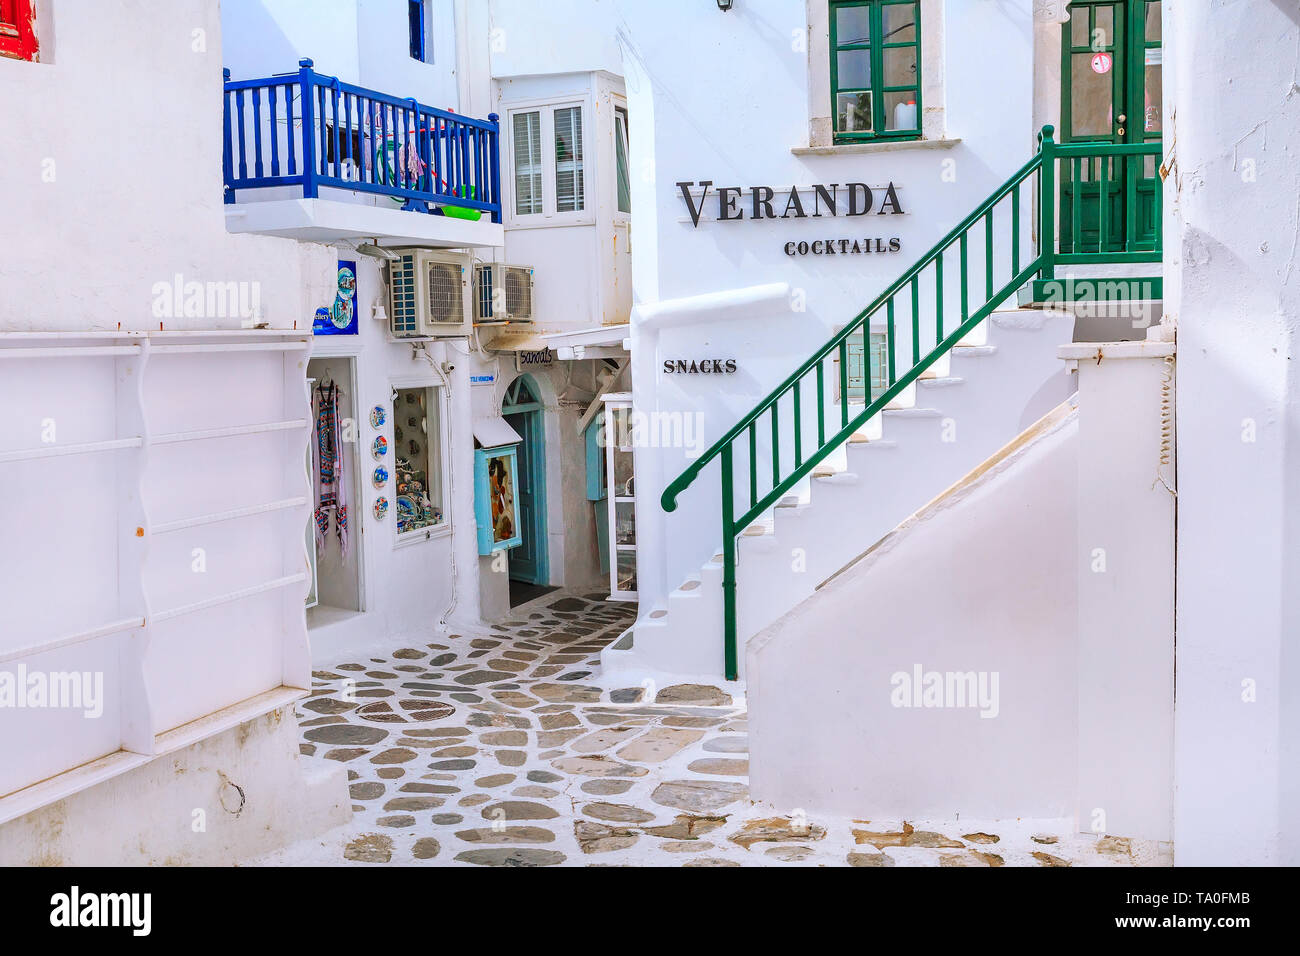 Mykonos, Greece - April 23, 2019: Famous island street view with white houses and souvenir gift shop in Cyclades Stock Photo